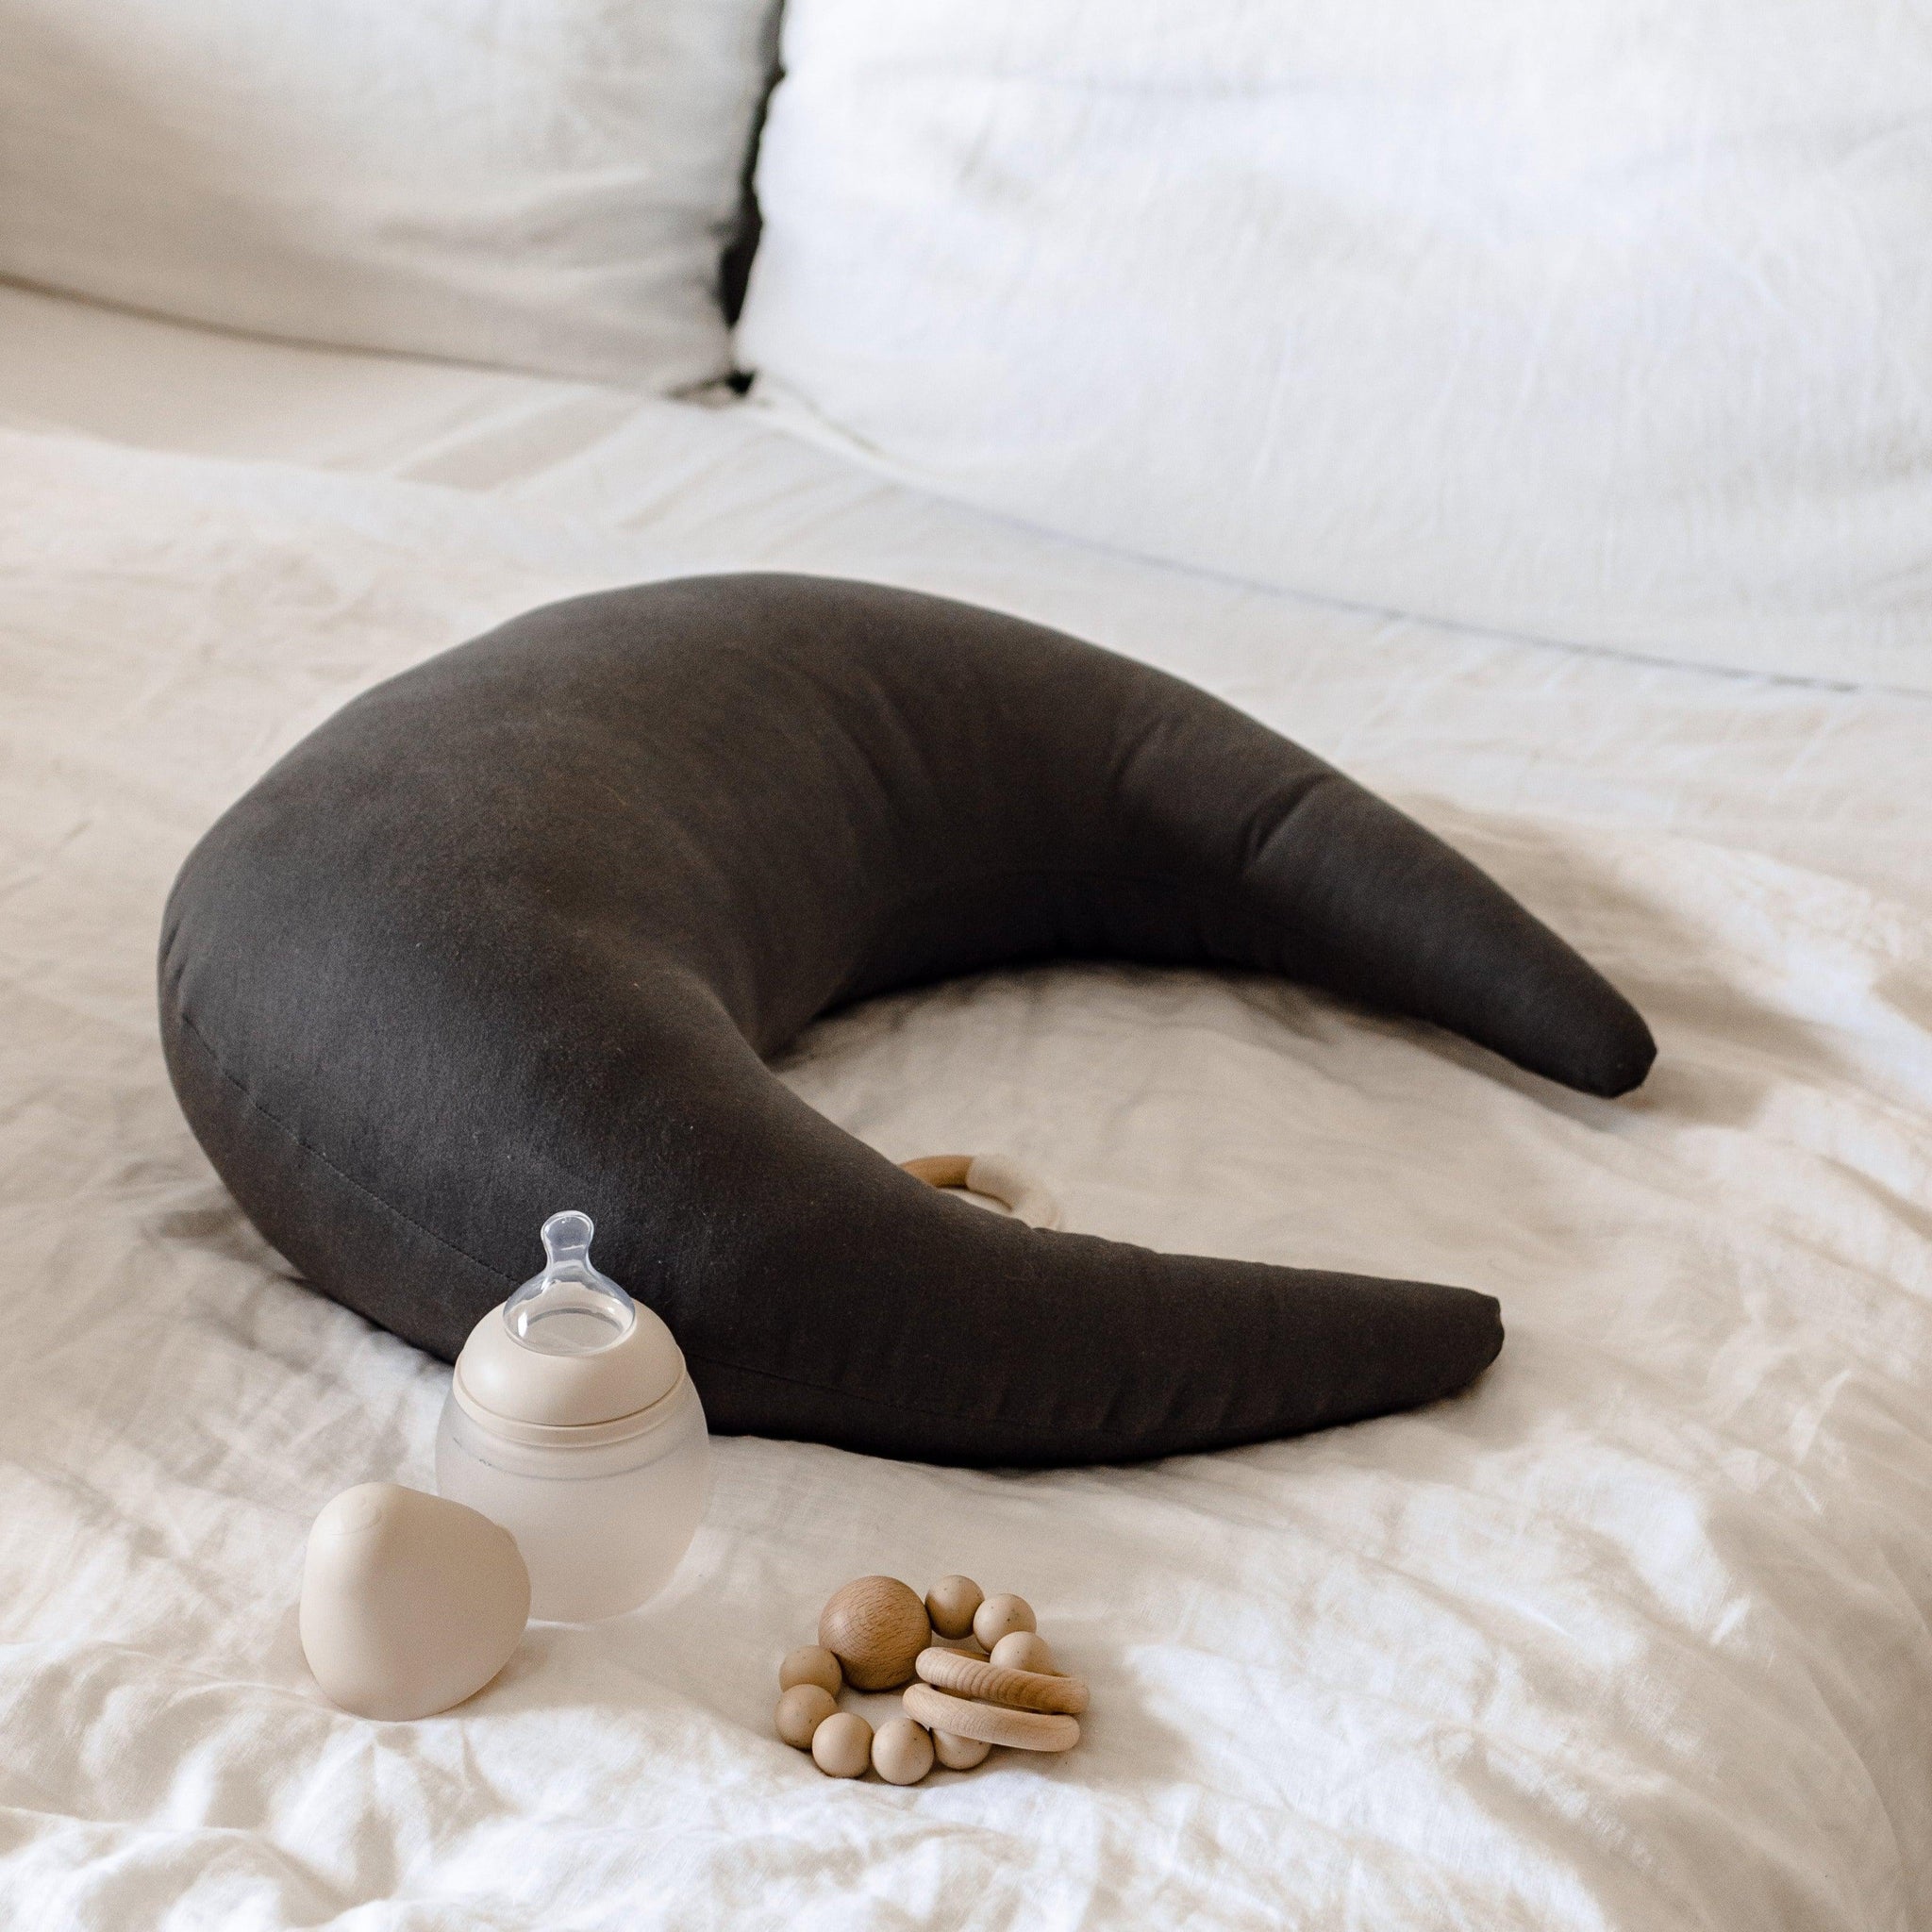 A PREORDER Sparrow Feeding & Support Pillow with a bottle on it.